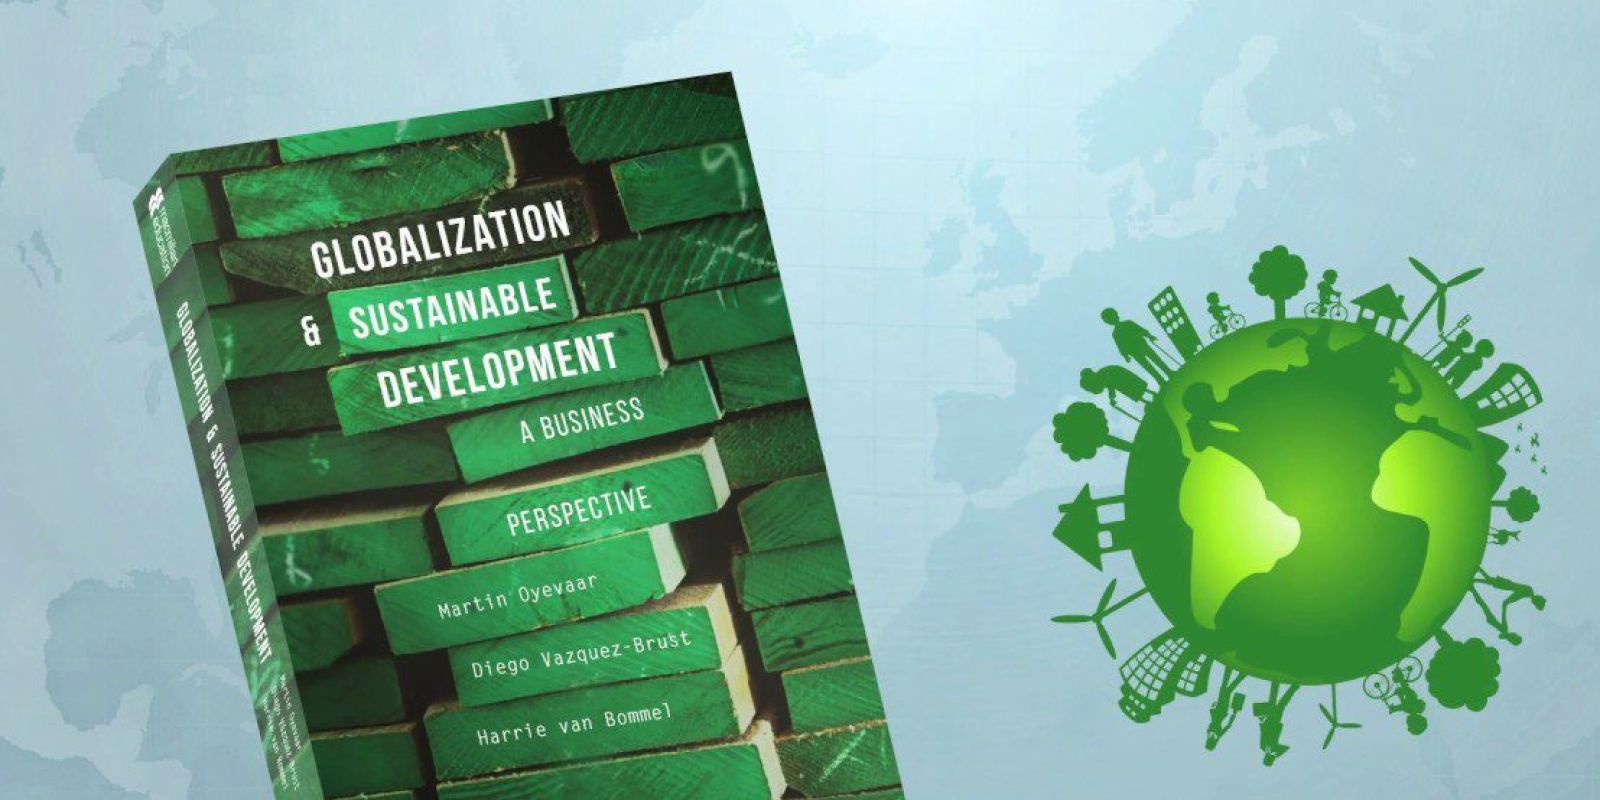 7 Must-Read Books On Sustainability admin ajax.php?action=kernel&p=image&src=%7B%22file%22%3A%22wp content%2Fuploads%2F2020%2F12%2FPURCorganics sustainable books